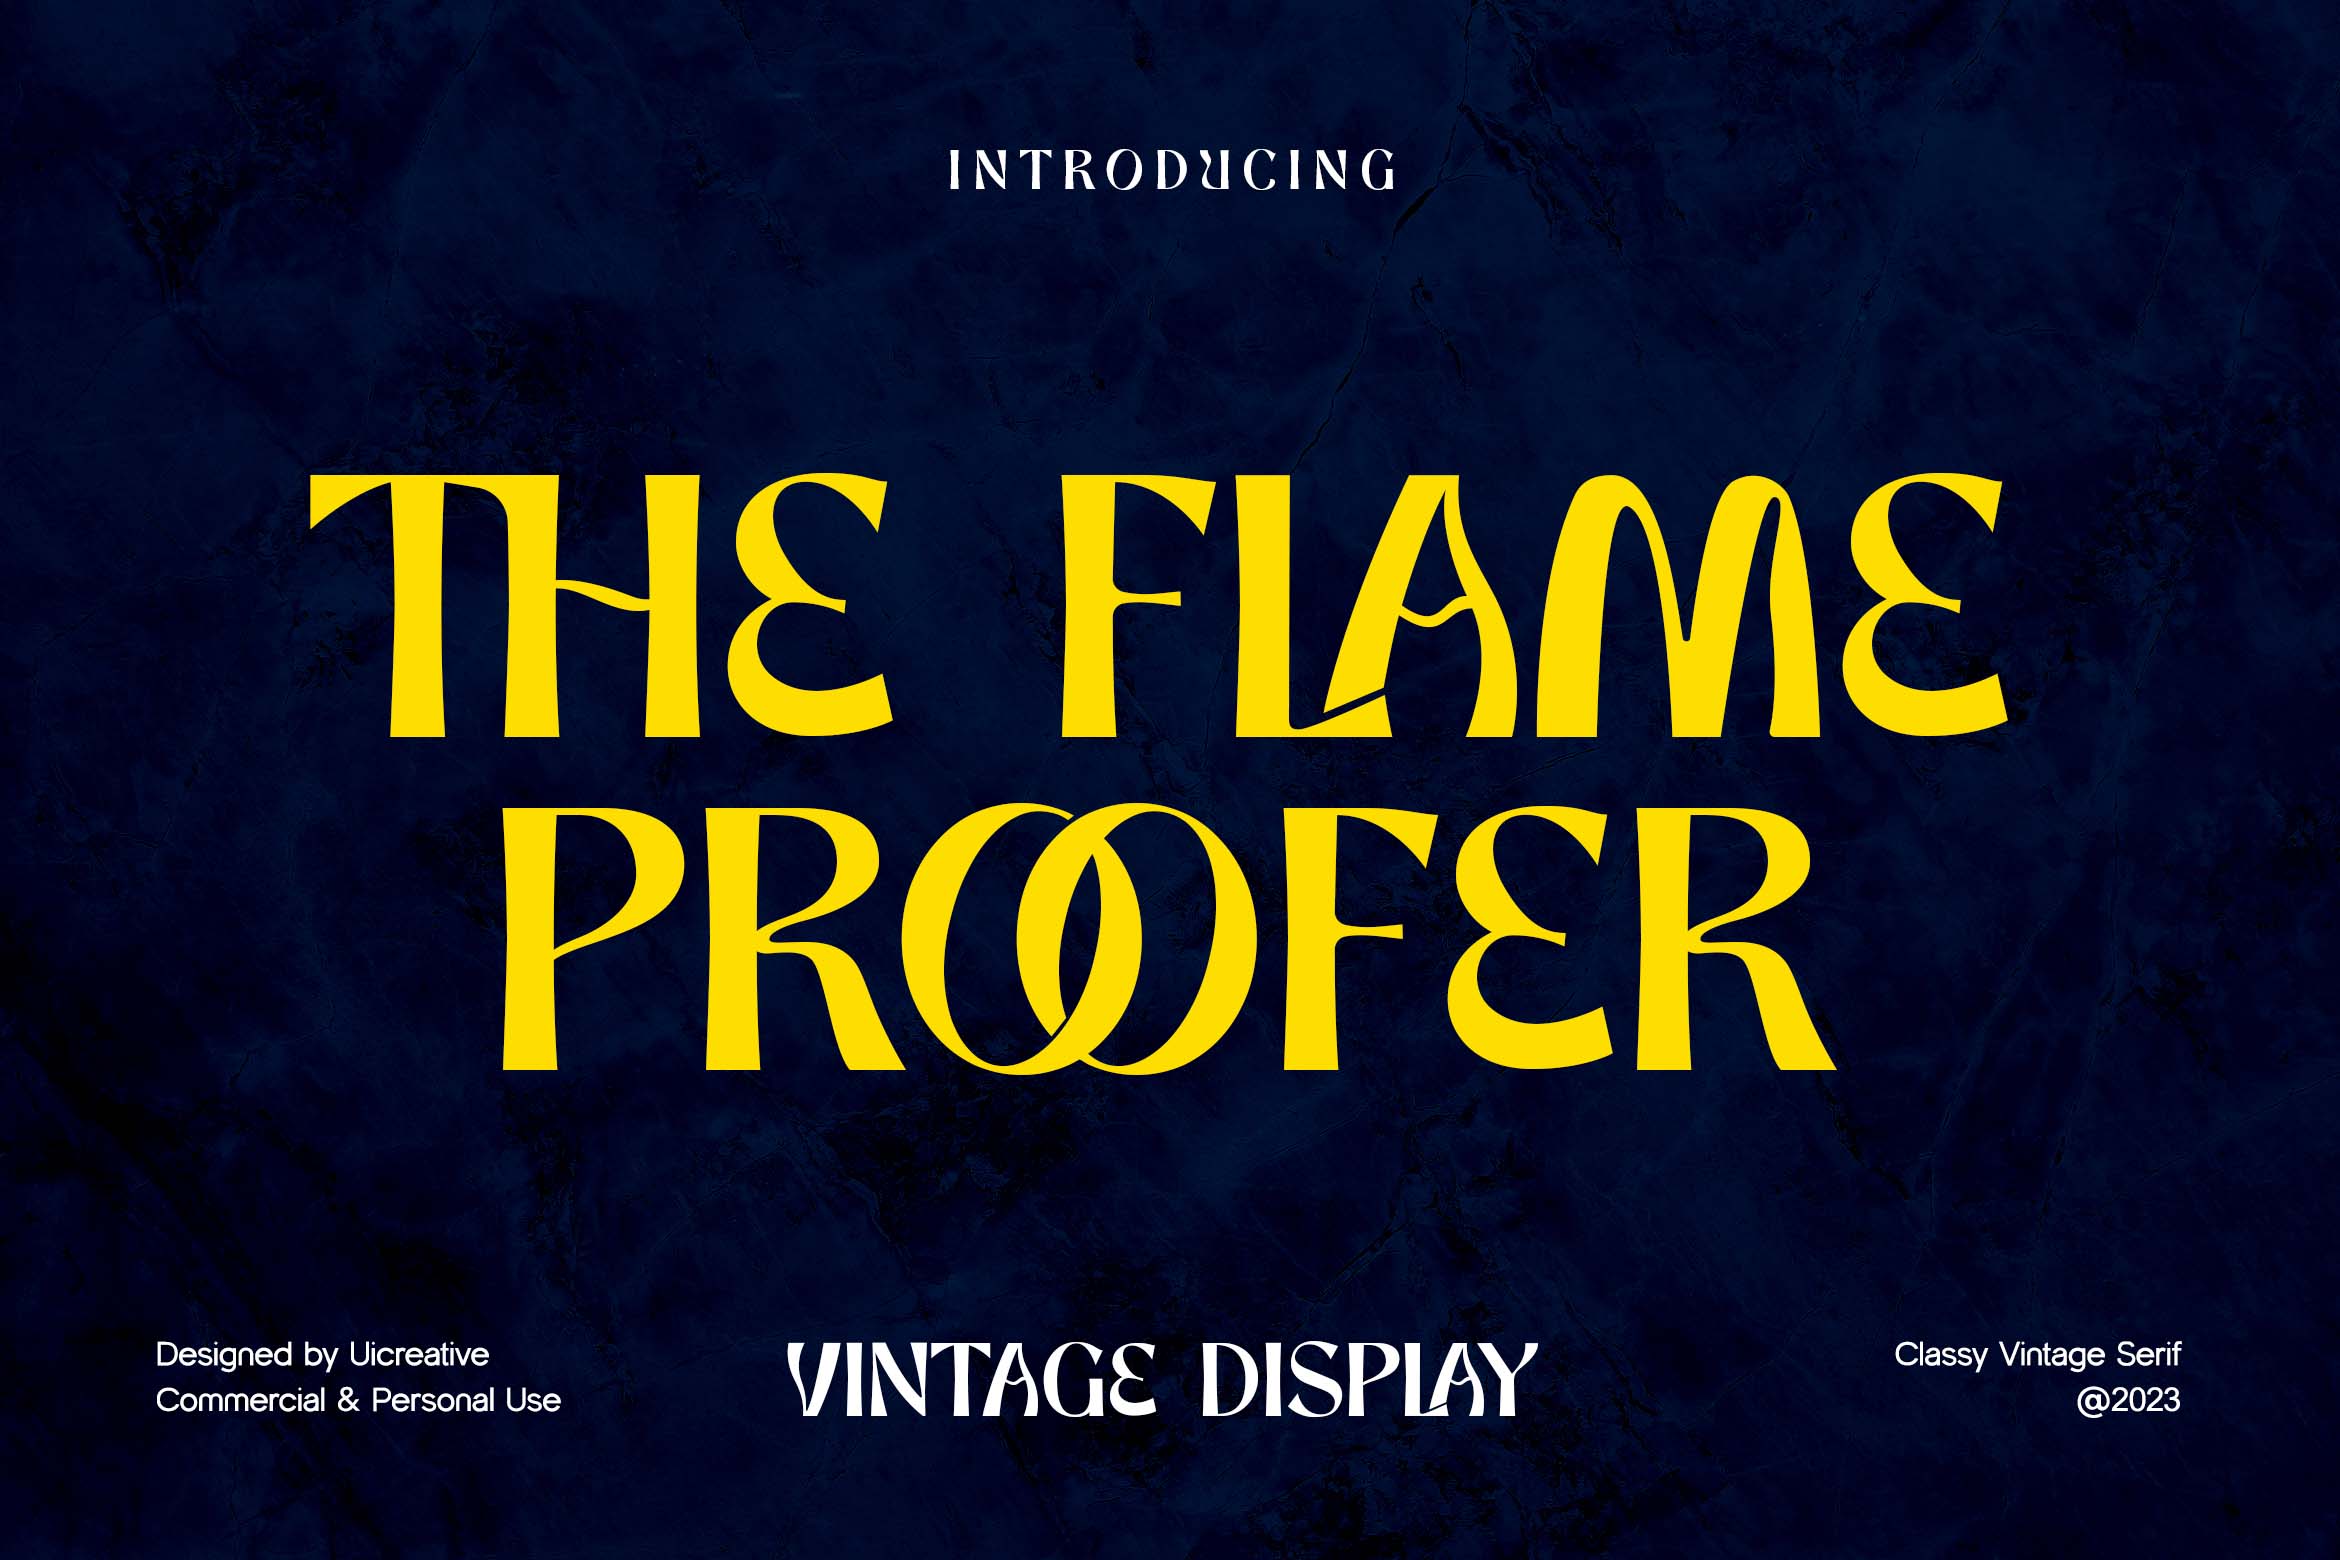 the flame proofer